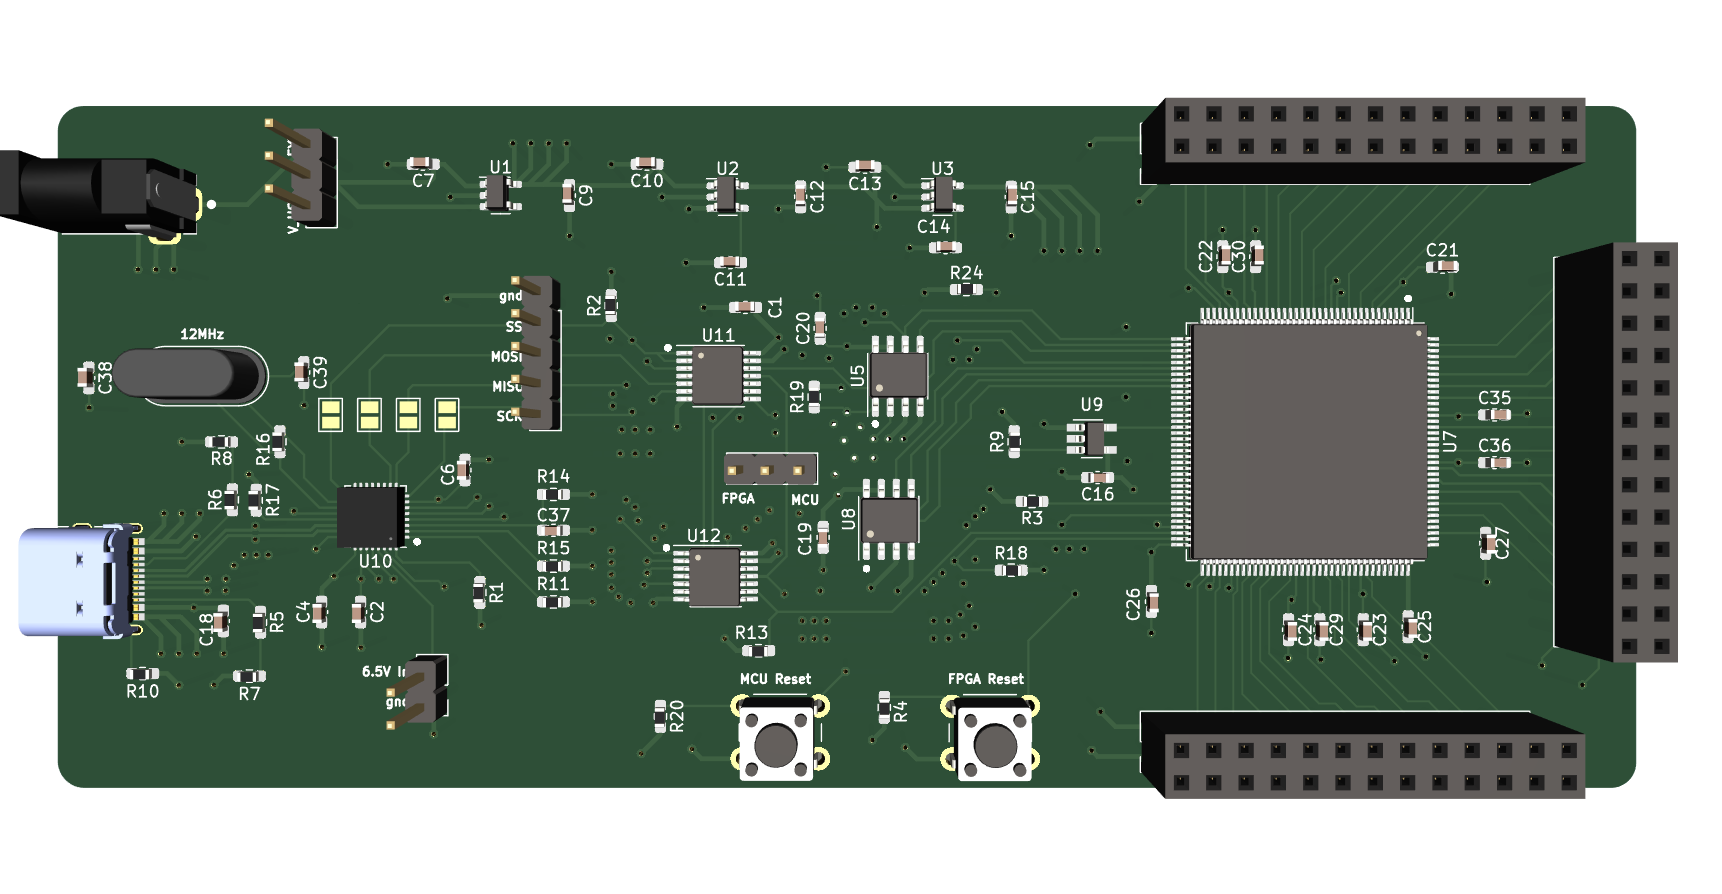 3D Rendering of the PCB